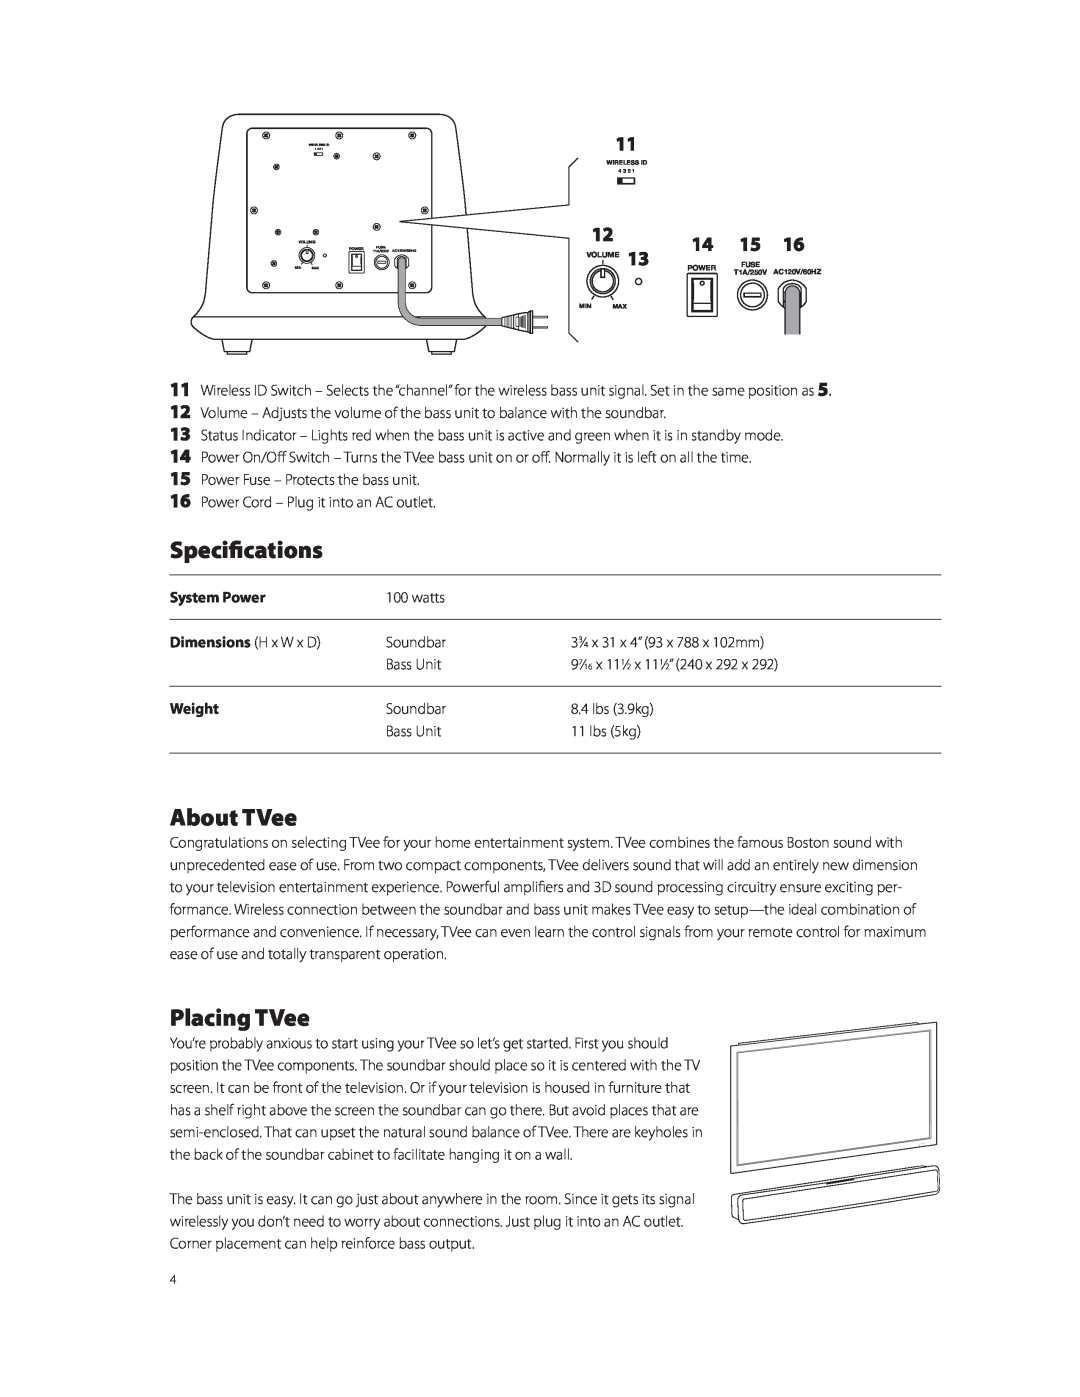 Boston Acoustics TVeeTM owner manual Specifications, About TVee, Placing TVee, System Power, Dimensions H x W x D, Weight 